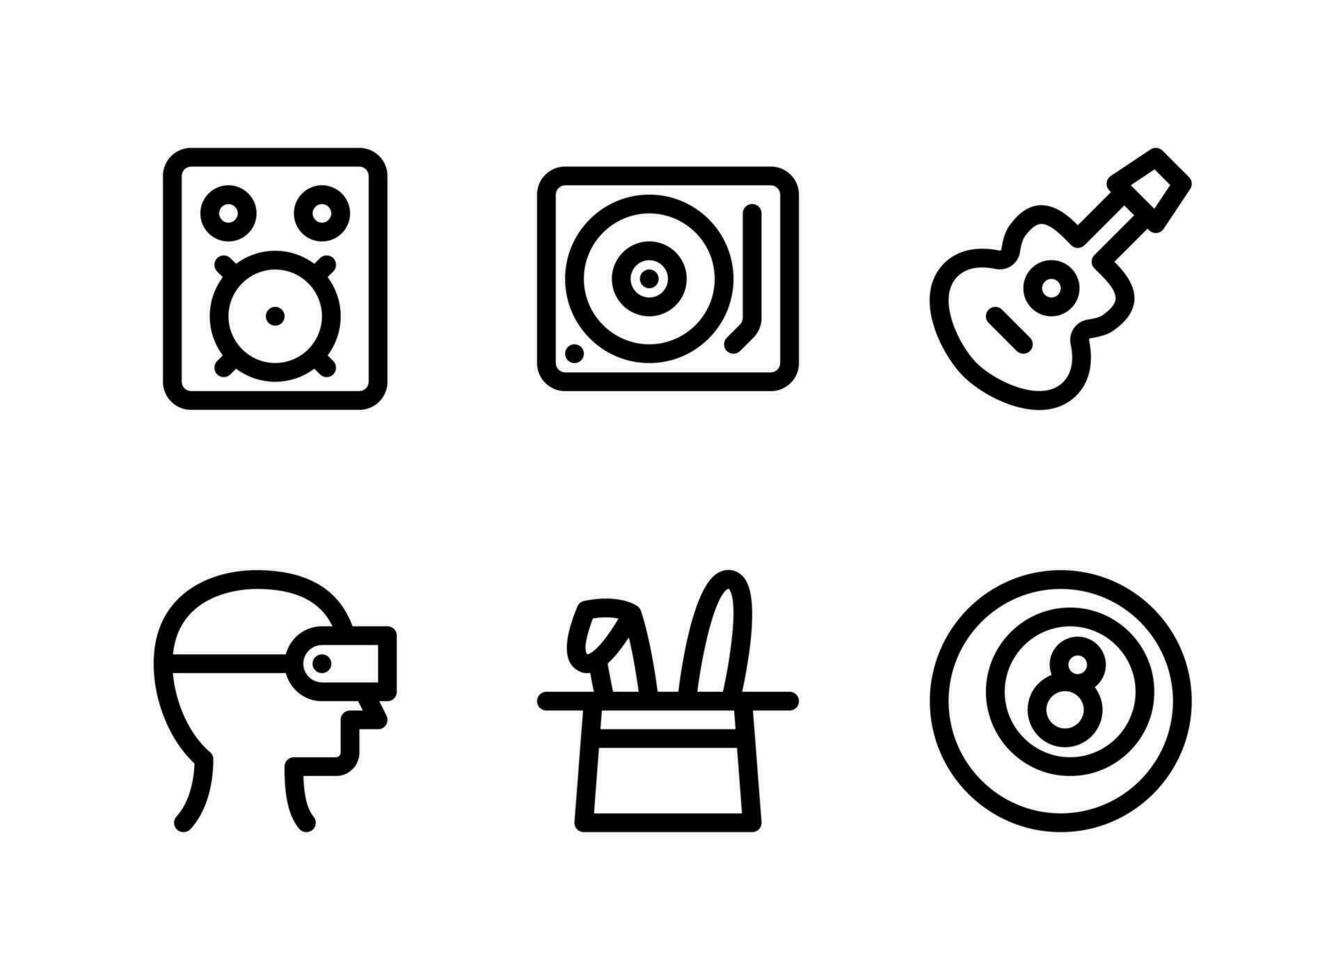 Simple Set of Entertainment Related Vector Line Icons